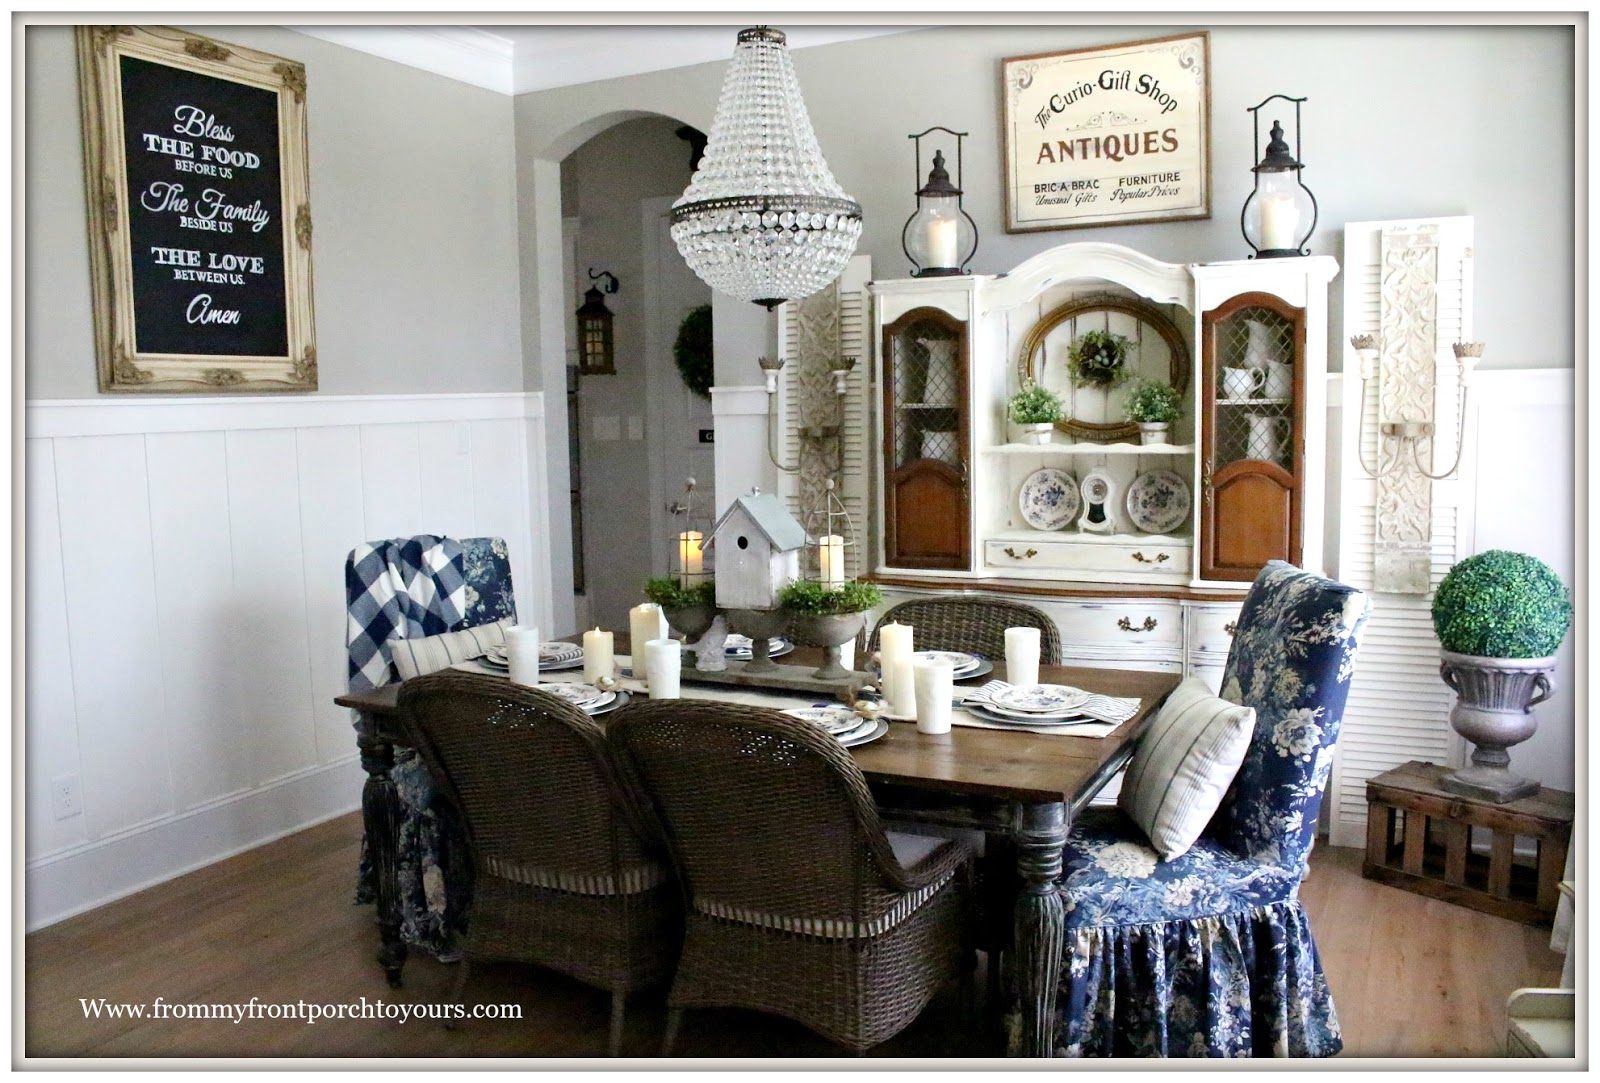 Decorate With Blue and White Buffalo Plaid  Blue decor, Blue white decor,  French country living room